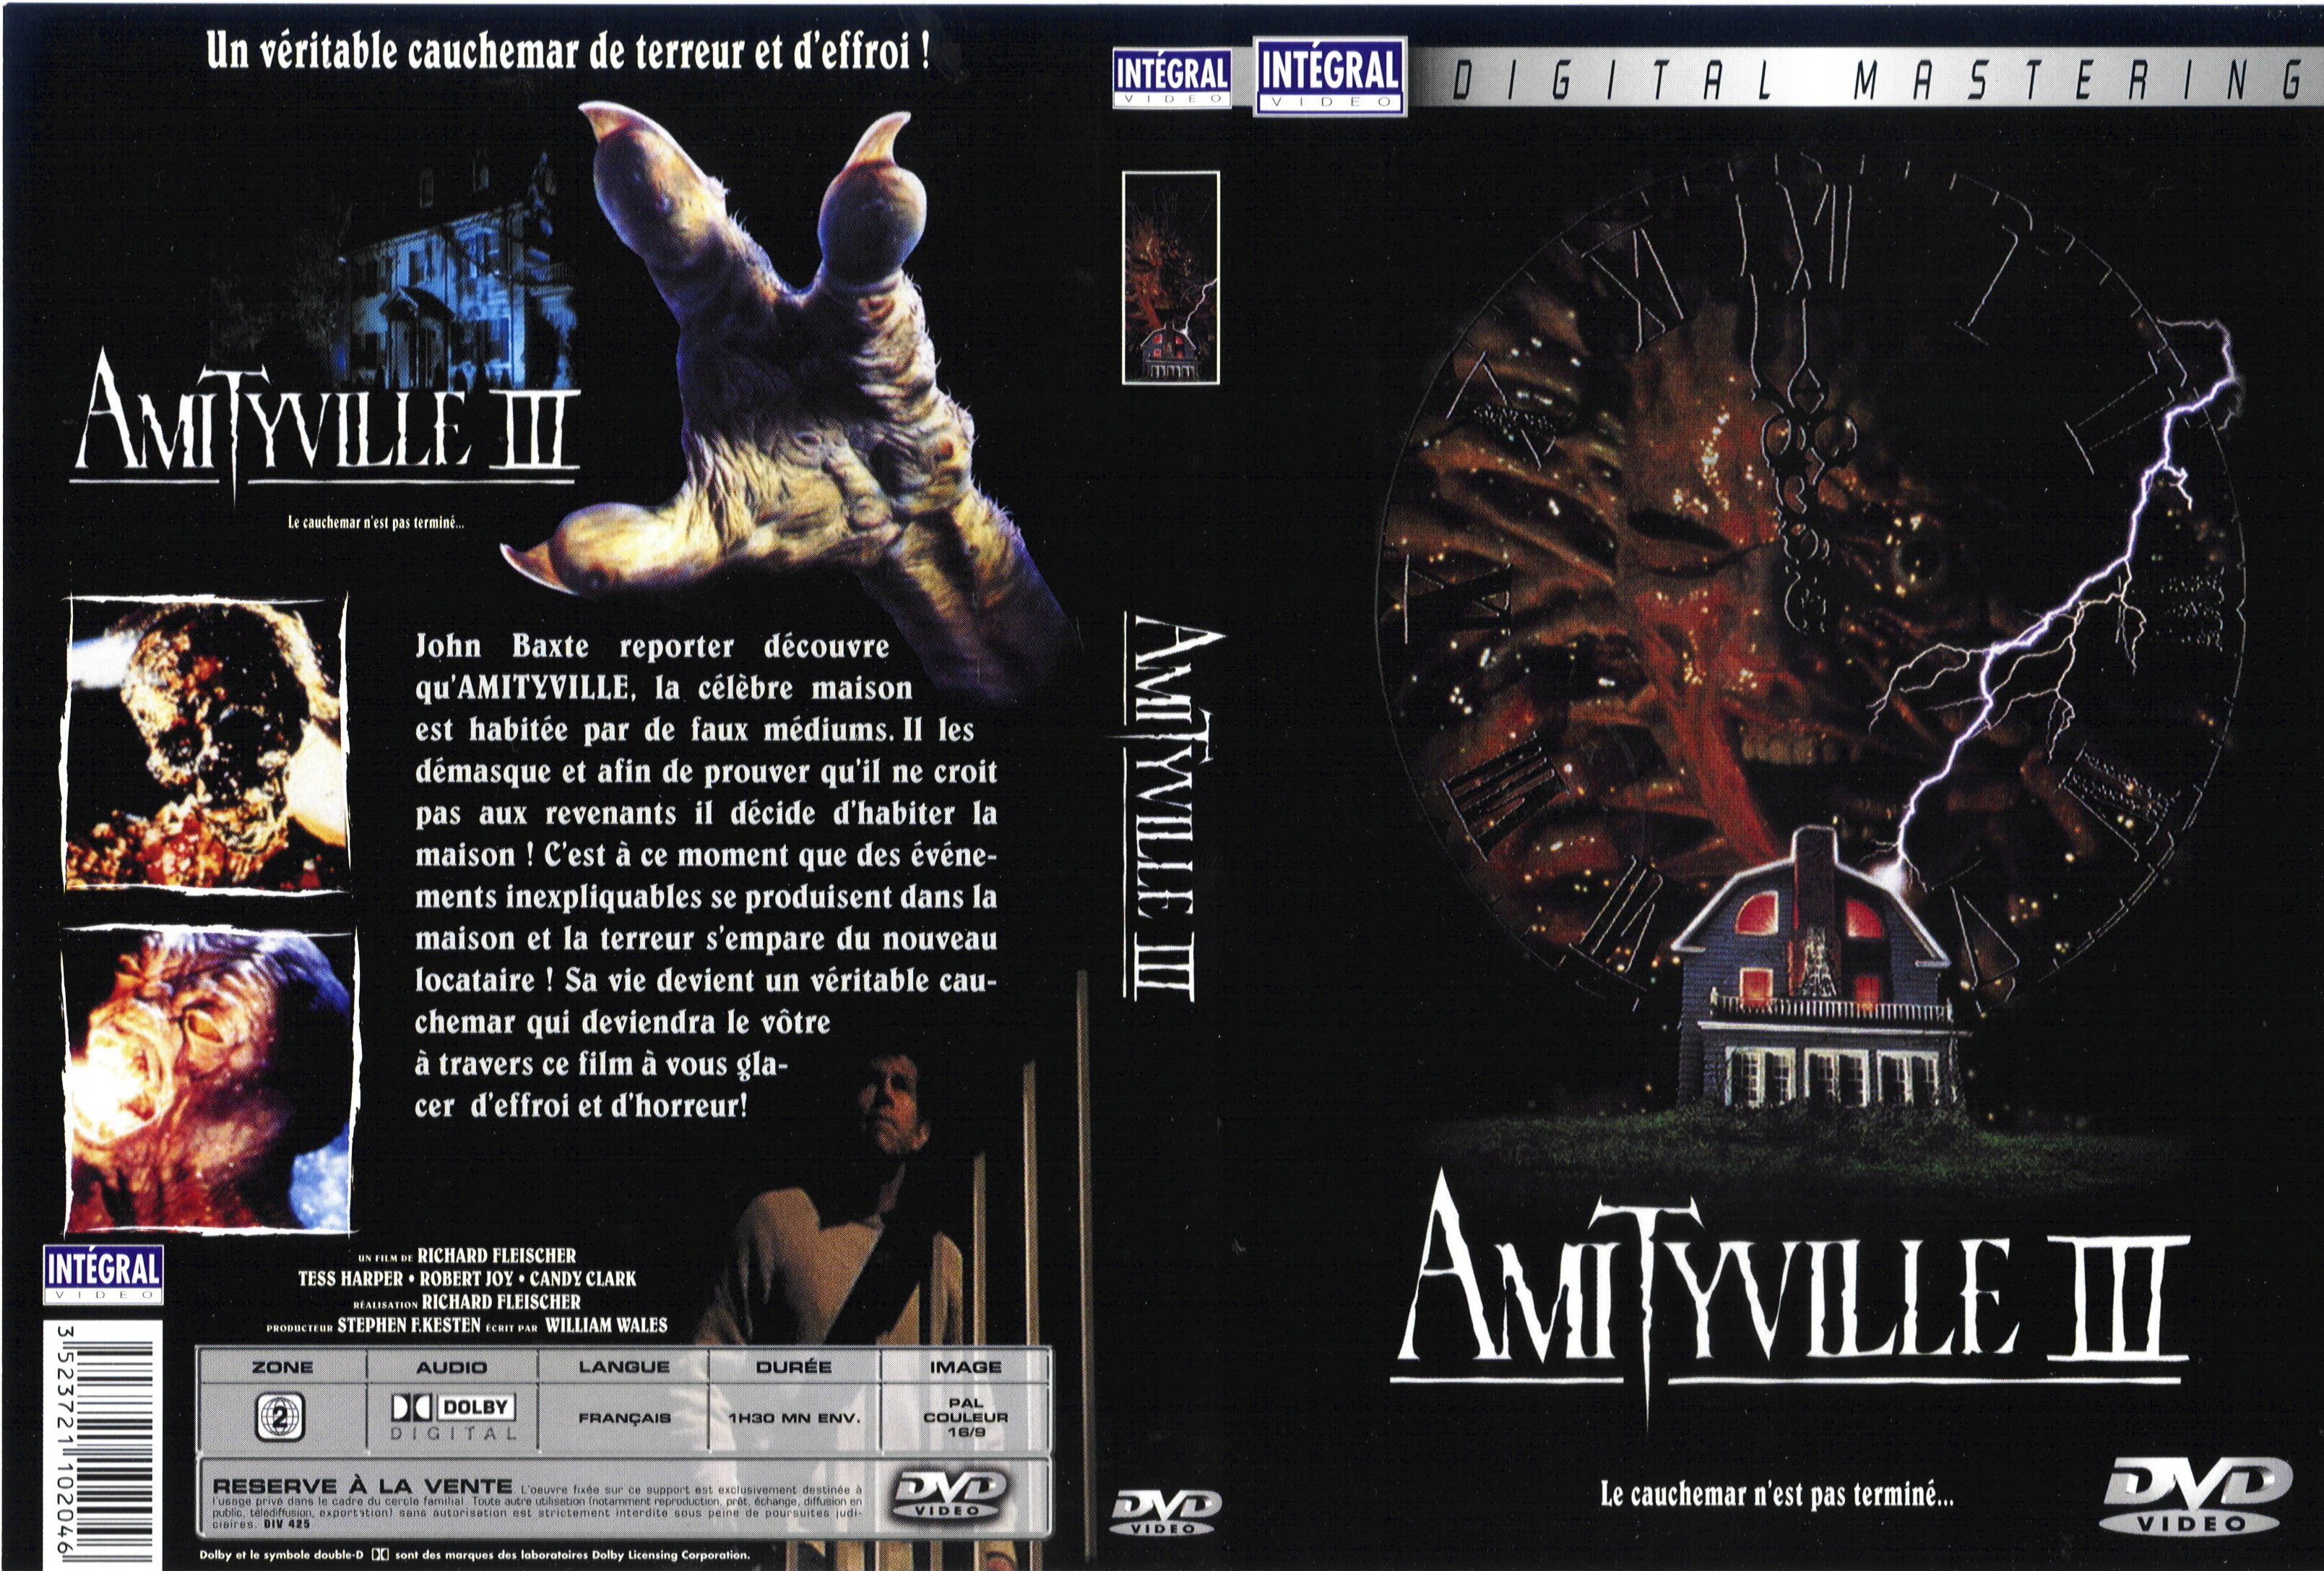 Jaquette DVD Amityville 3 v2